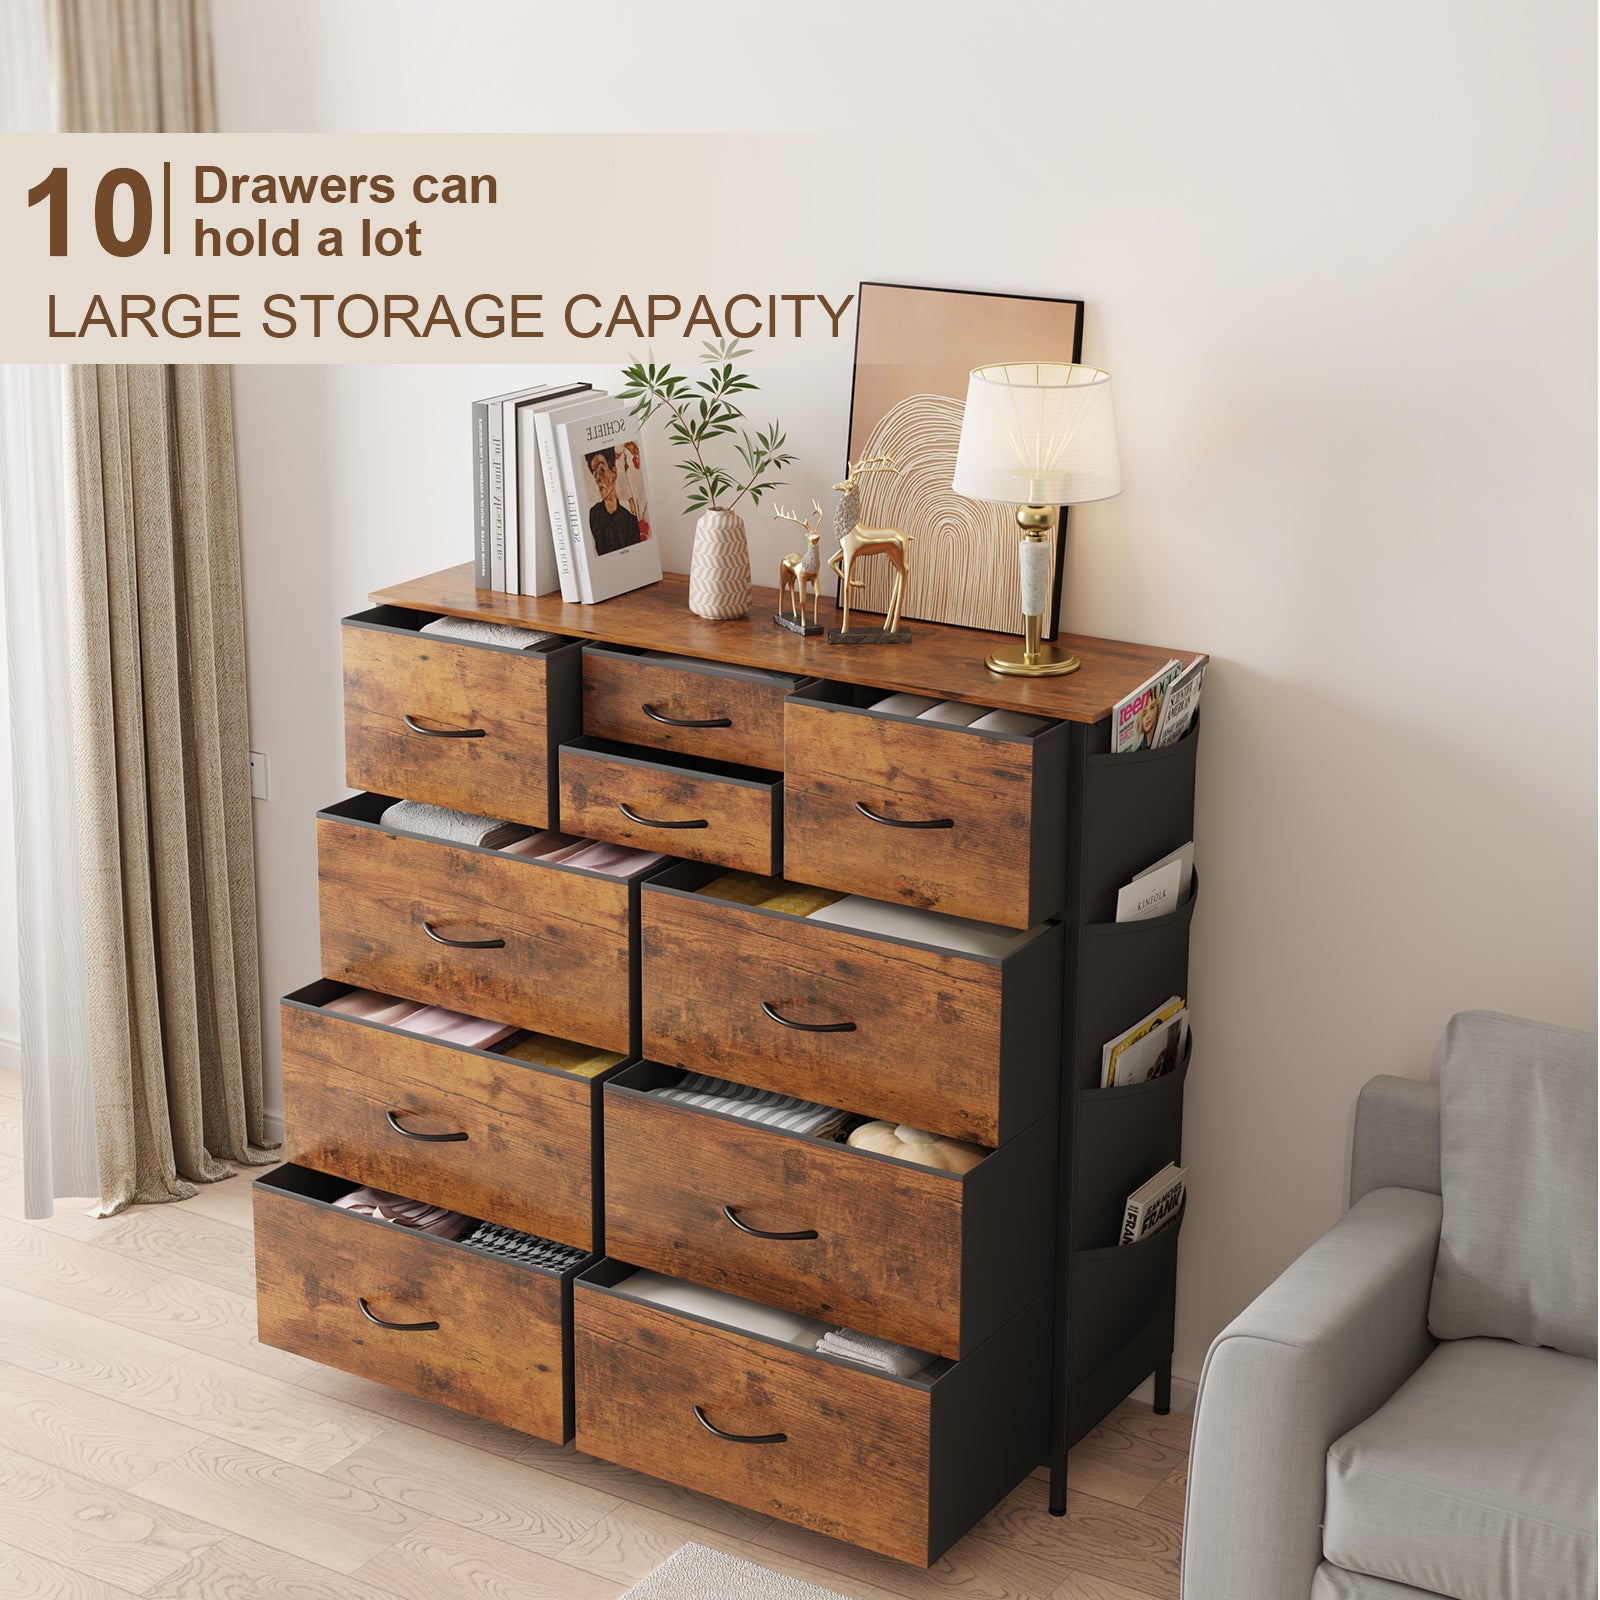 SUGIFT 10 Drawers Dresser for Bedroom, Fabric Storage Organizer Unit for Living Room, Hallway, Closet (Rustic Brown)